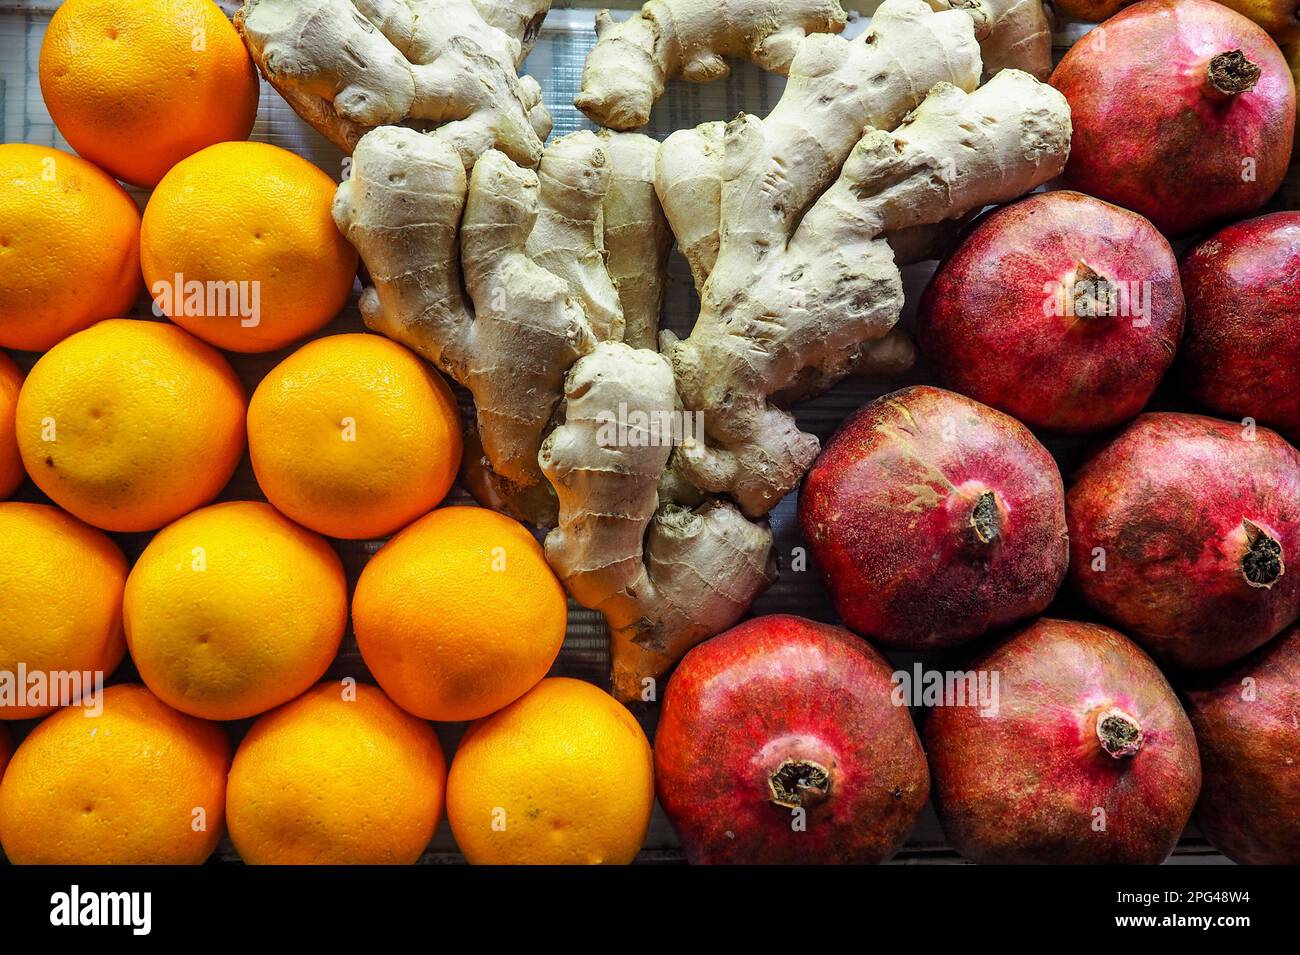 Oranges, ginger and pomegranate displayed at street market in Morocco, closeup detail Stock Photo